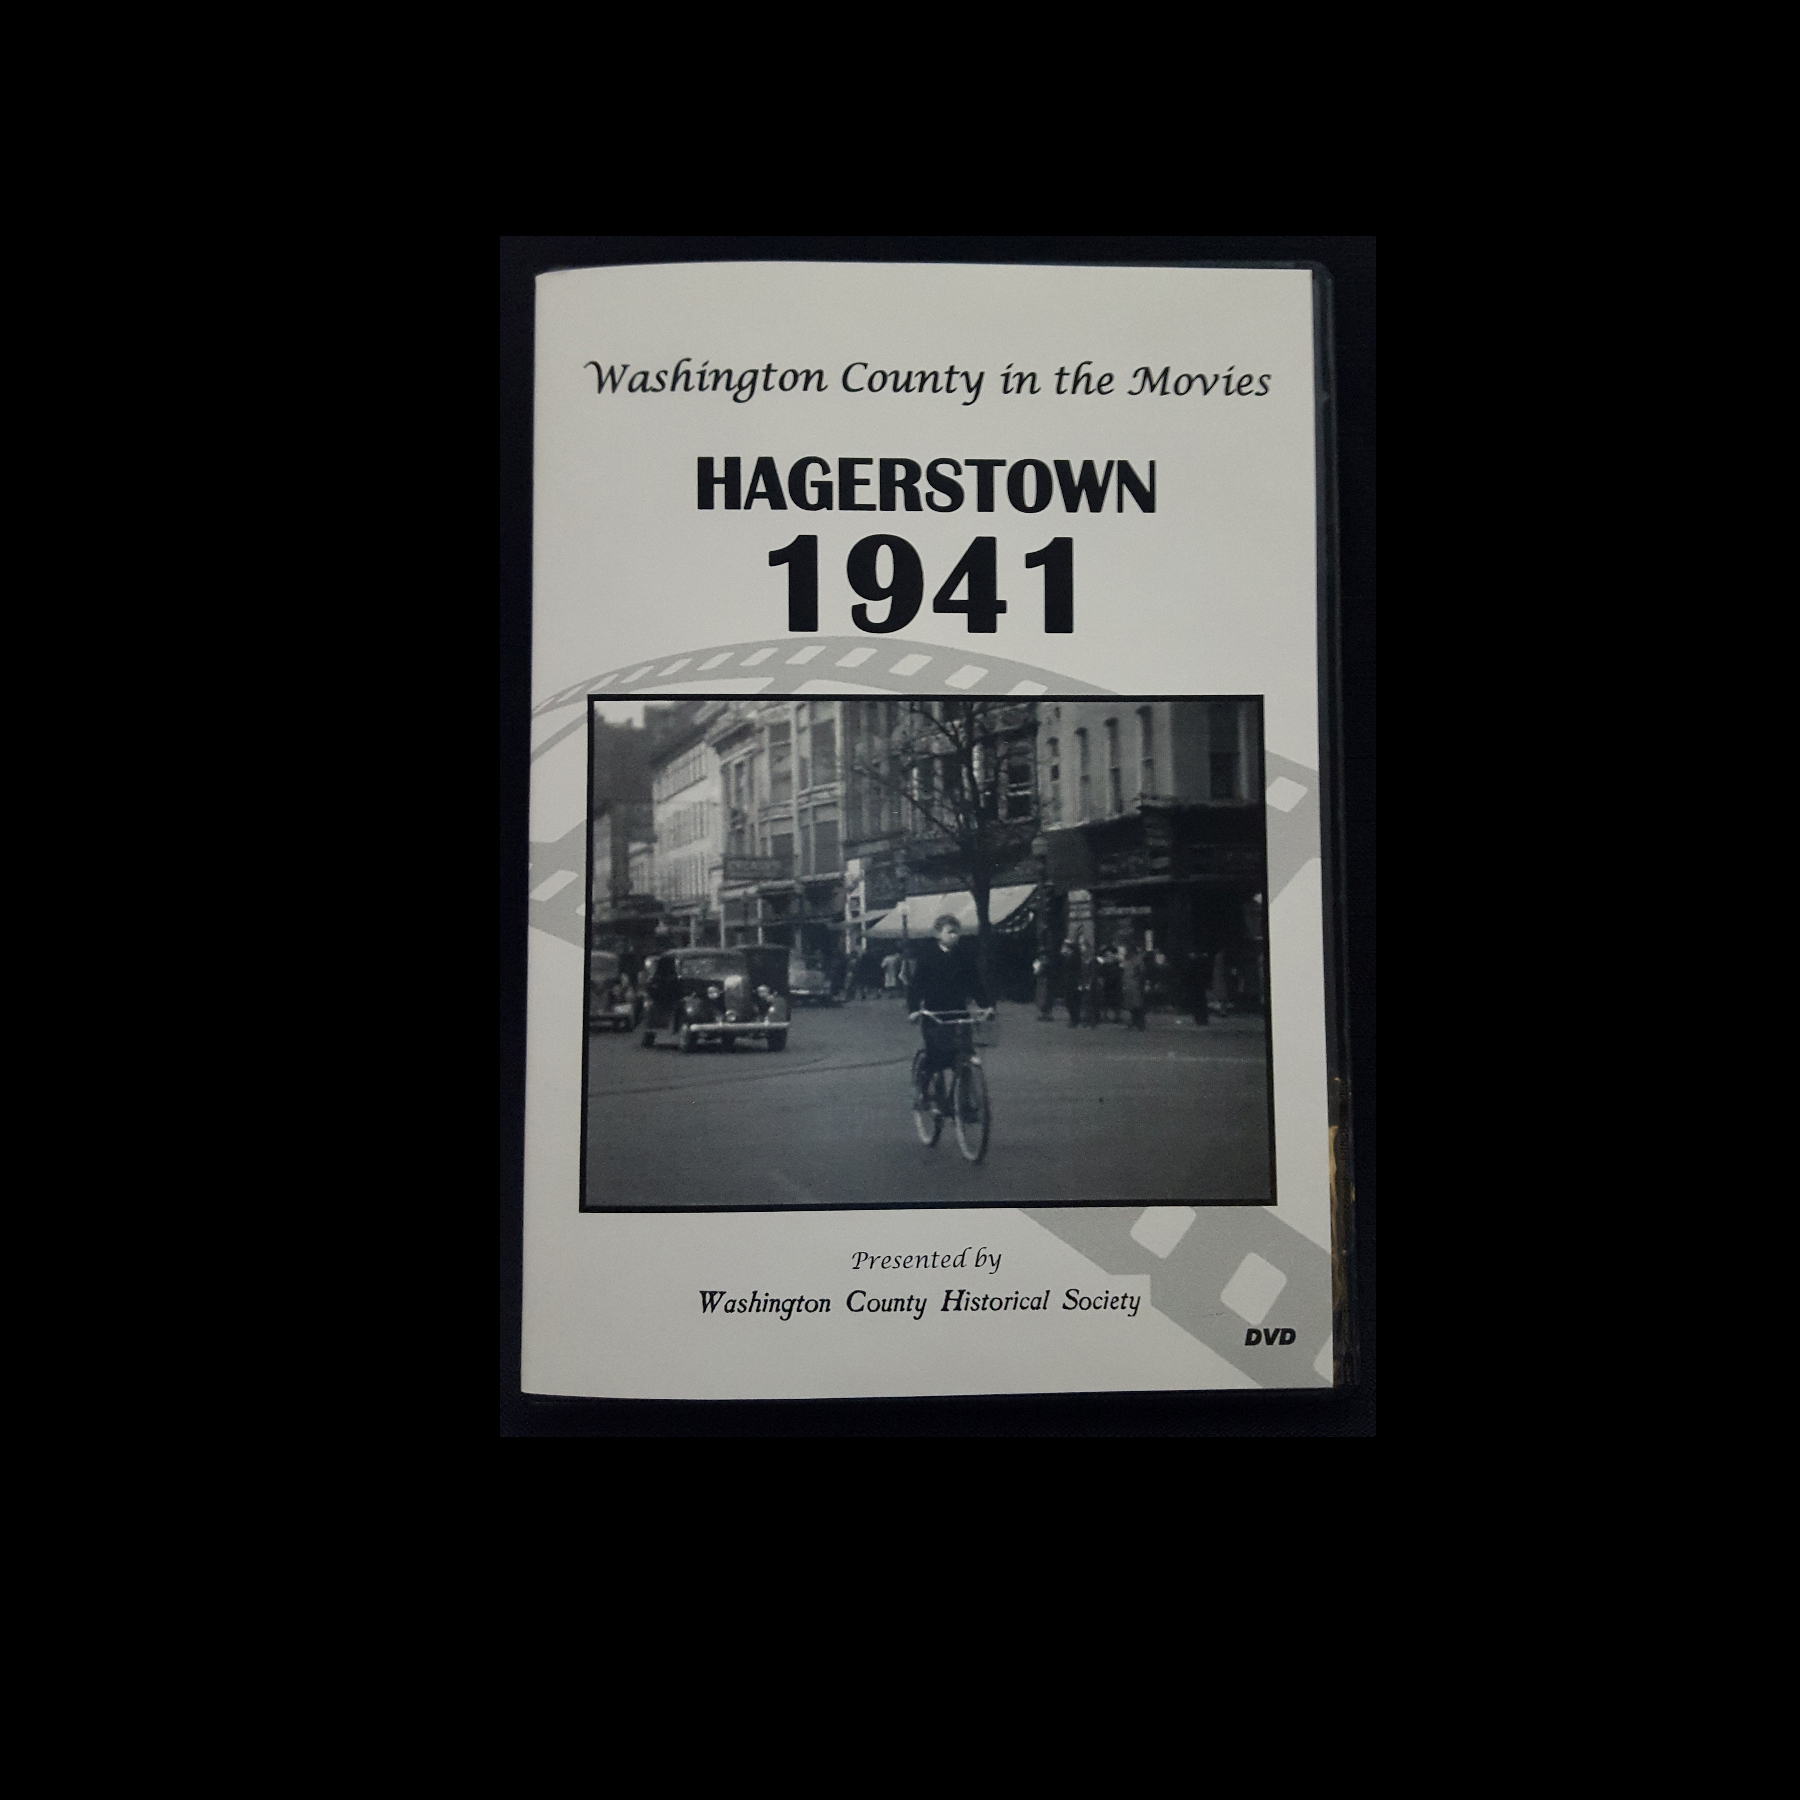 Hagerstown 1941: Washington County in the Movies – Washington County